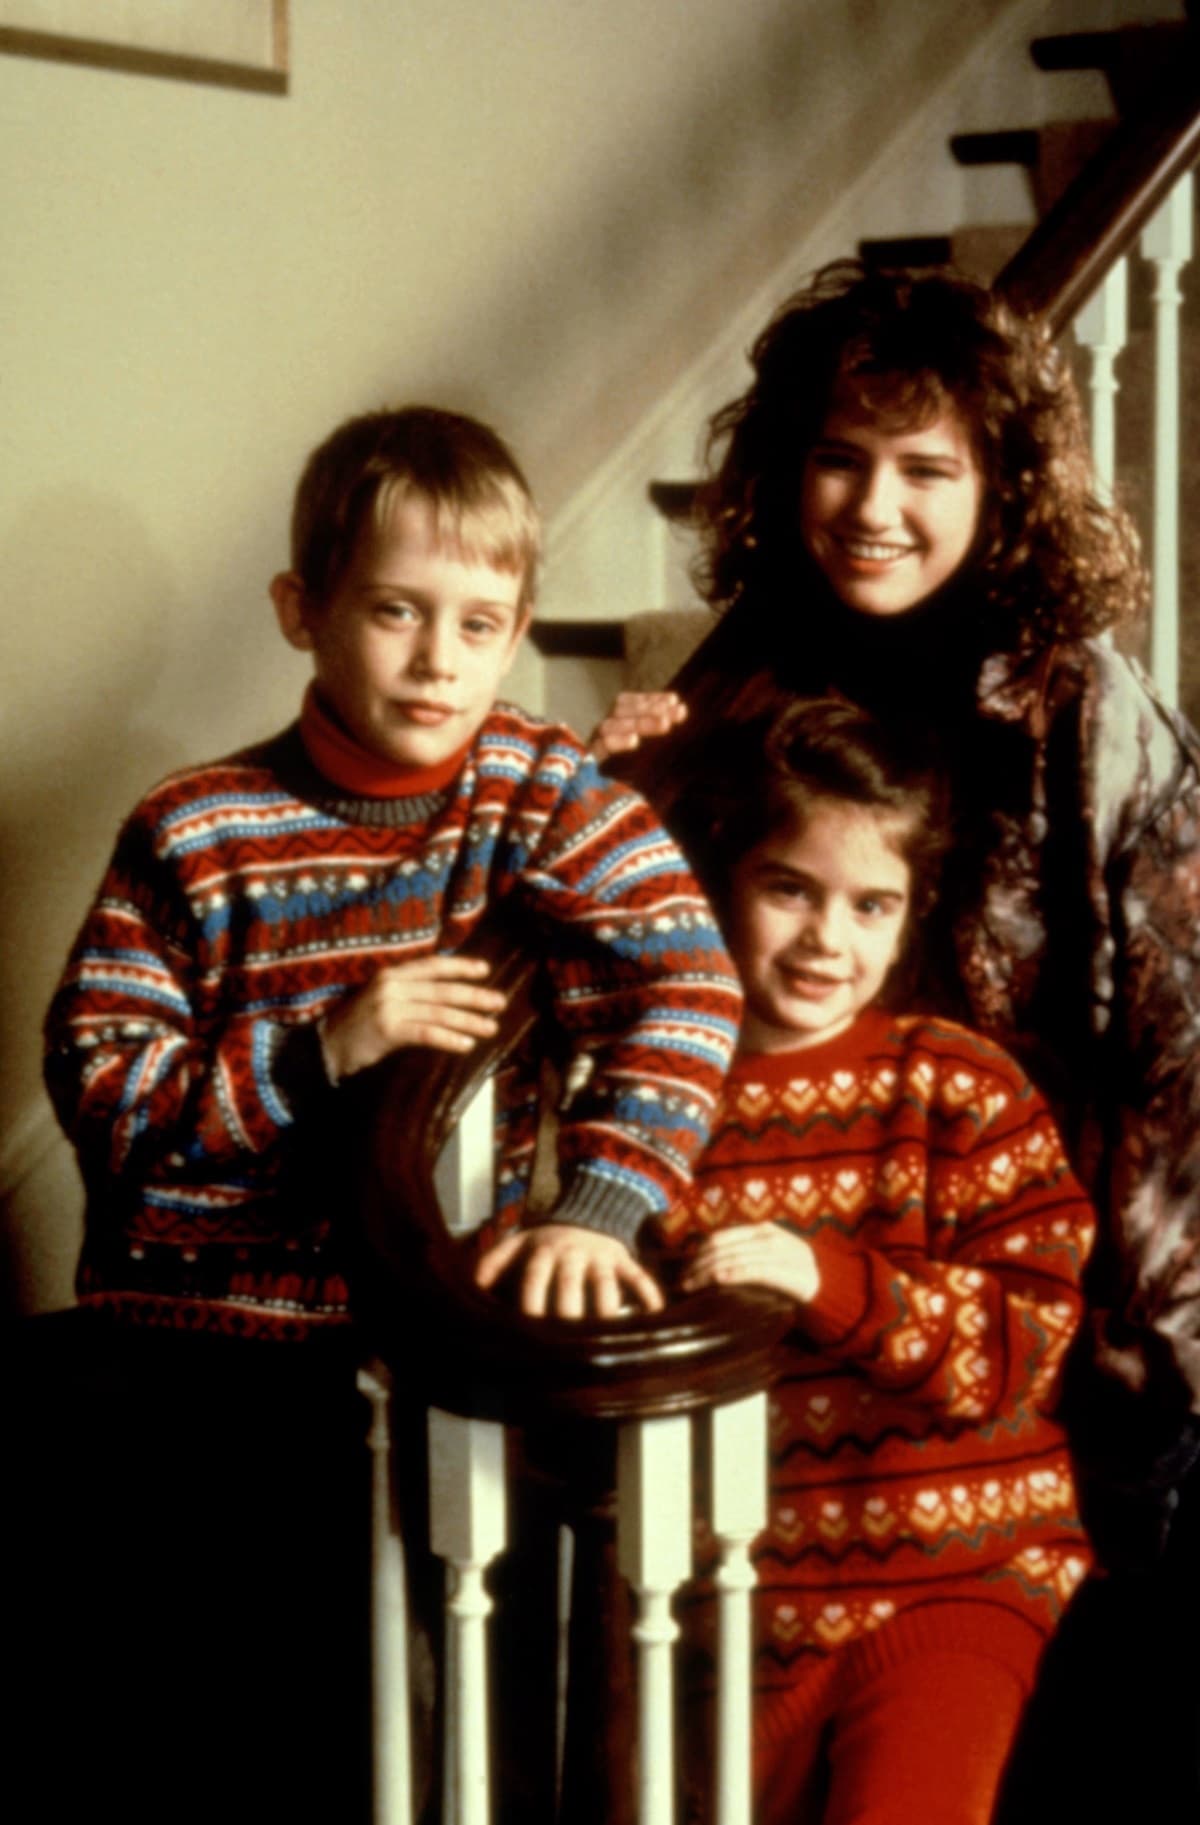 When "Uncle Buck" was released in theaters on August 16, 1989, Gaby Hoffmann was 7 years old, Macaulay Culkin was 8 years old, and Jean Louisa Kelly was 17 years old